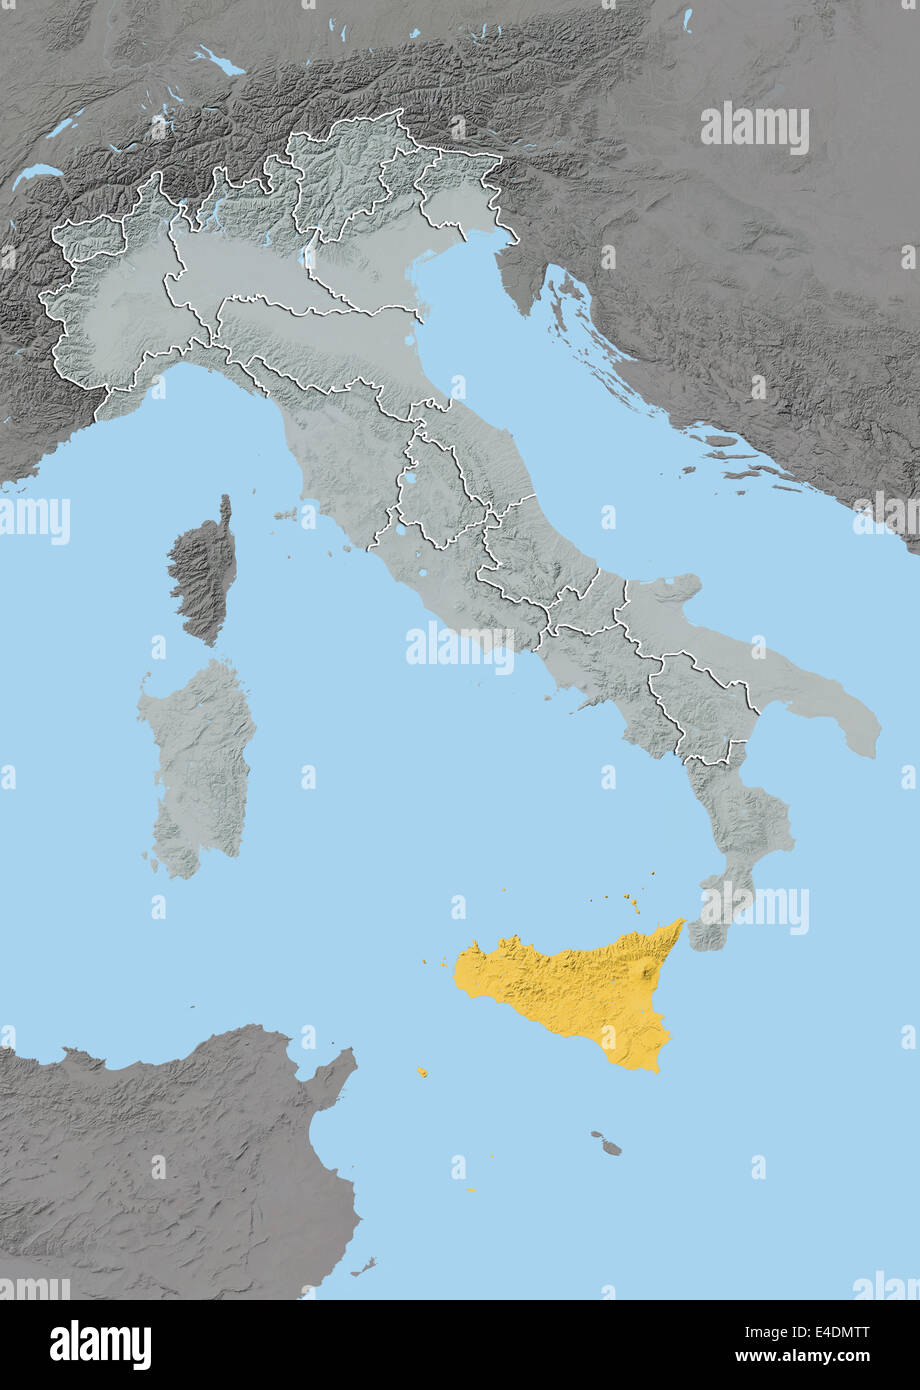 Region of Sicily, Italy, Relief Map Stock Photo